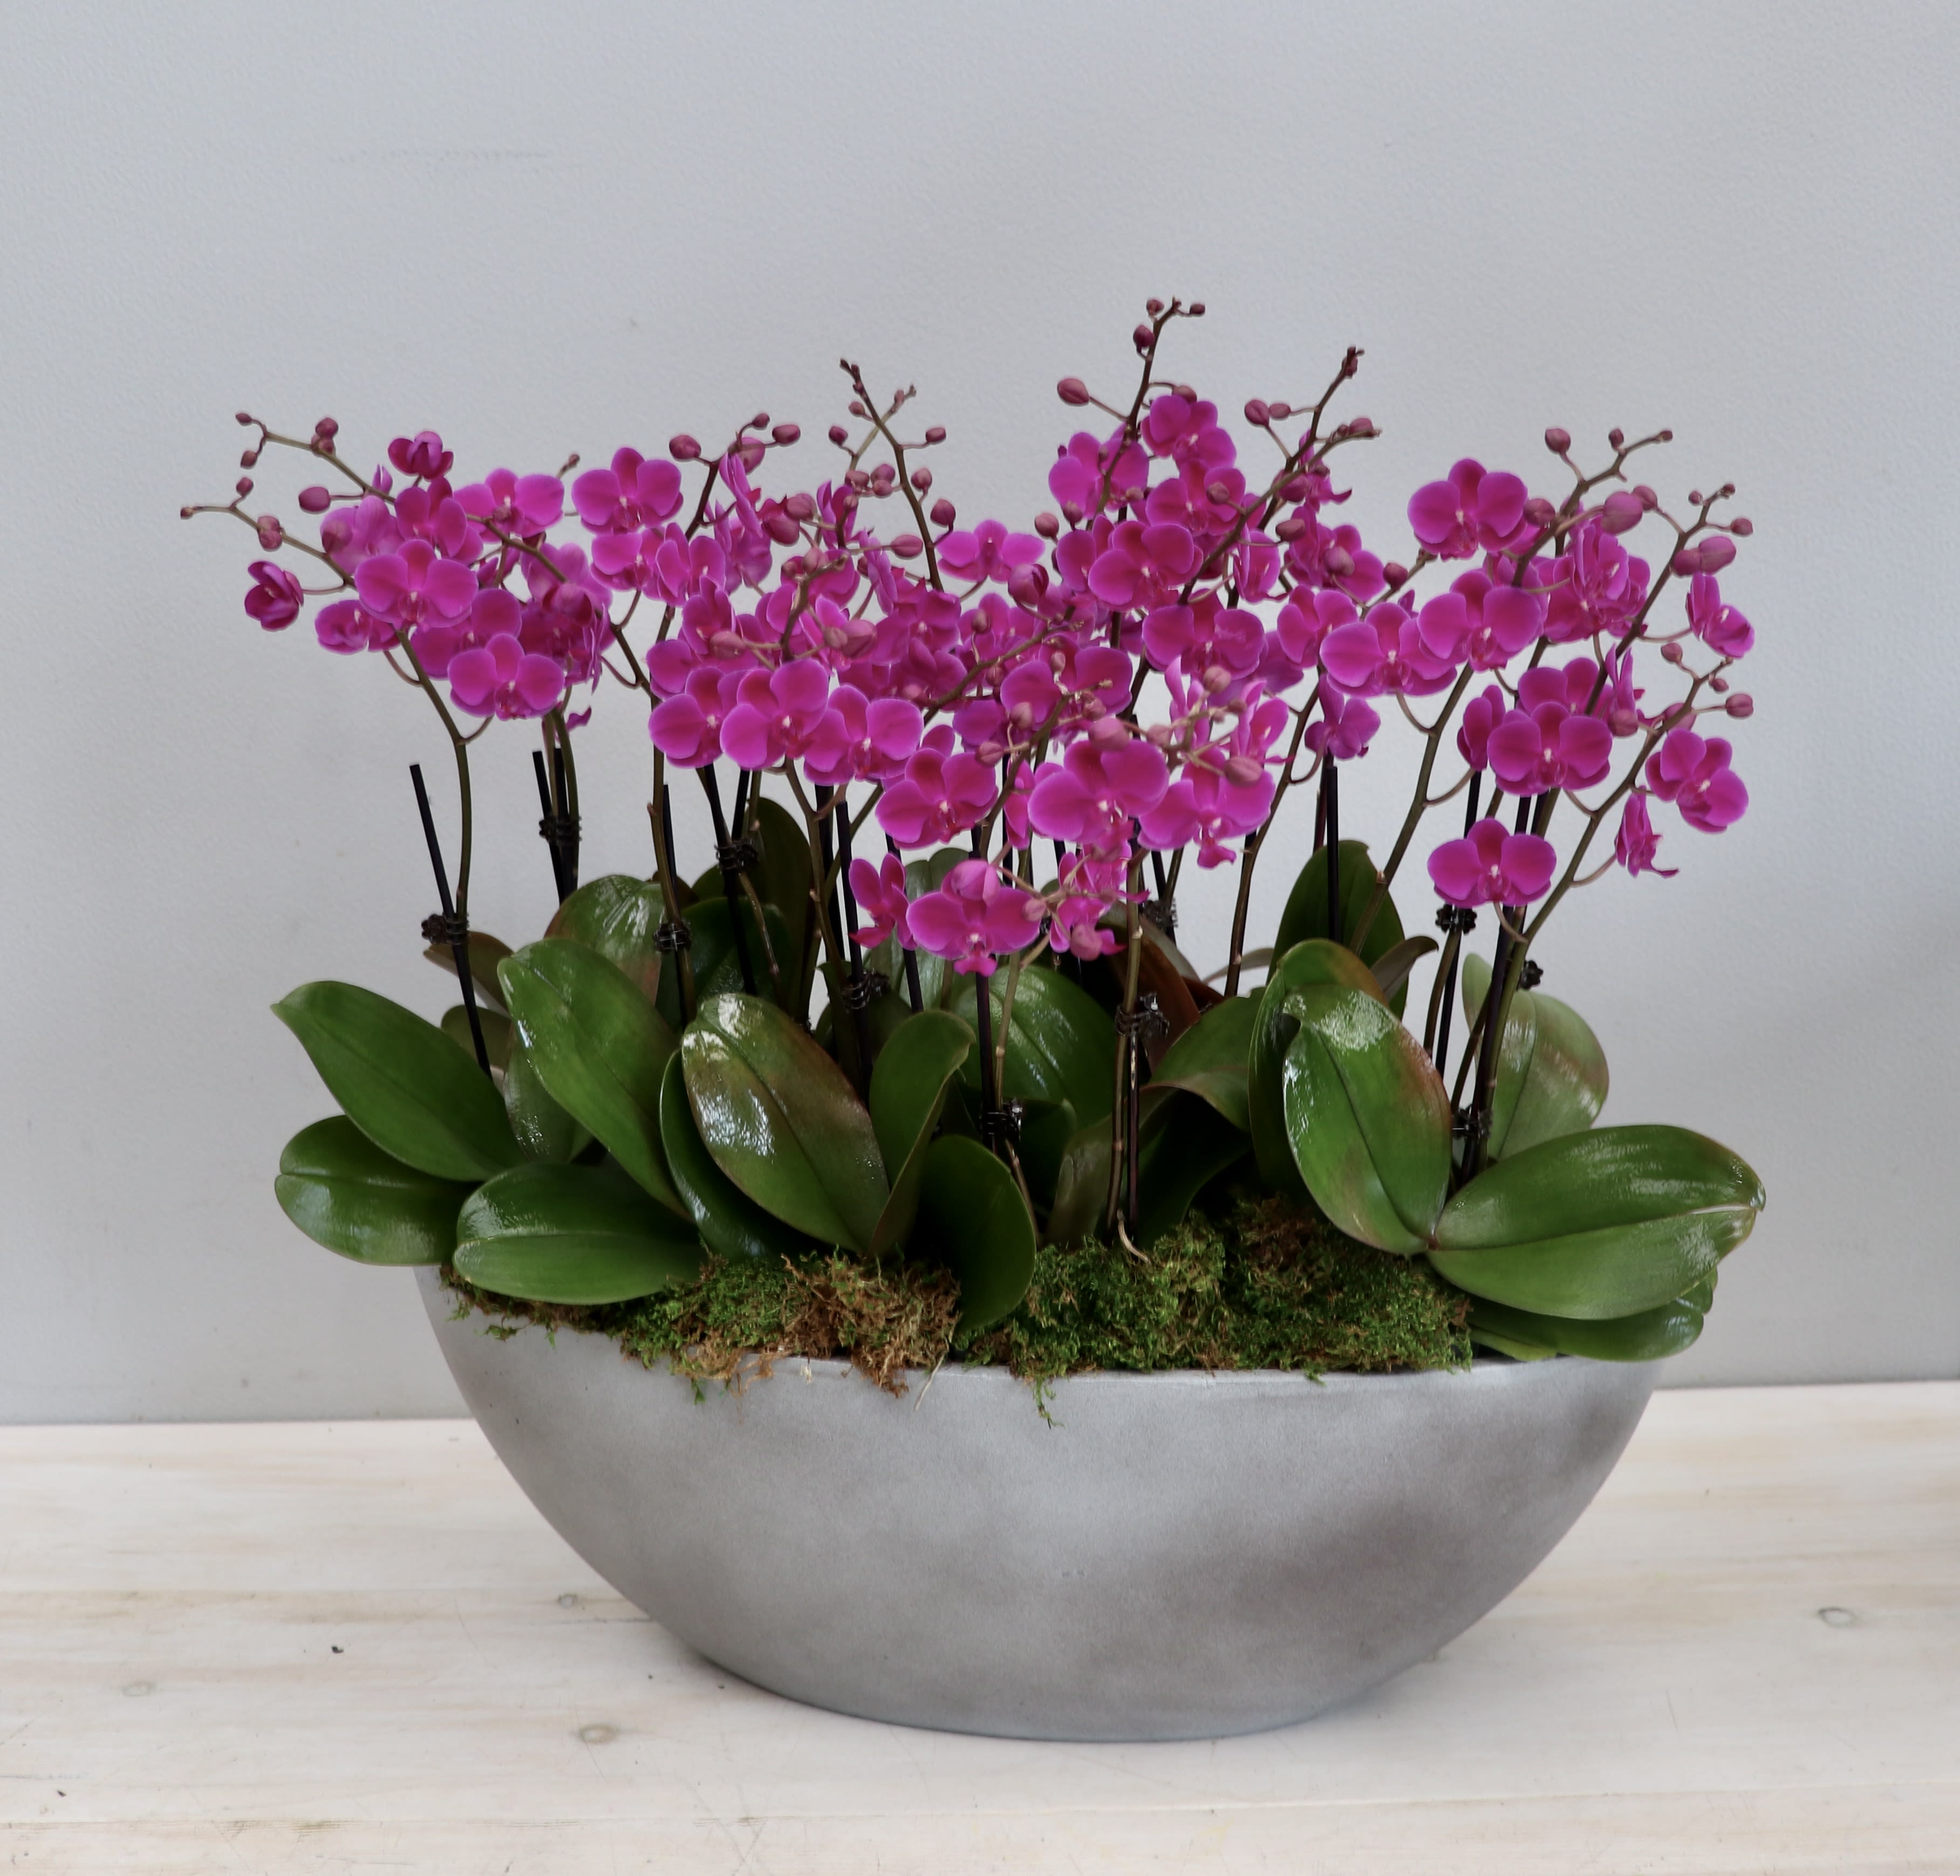 Purple Orchid Arrangement - My Glendale Florist - The purple orchid arrangement in the oval vessel is a stunning display of elegance and sophistication. The rich and vibrant purple hue of the orchids contrasts beautifully against the green moss and neutral color of the vessel, creating a visually stunning arrangement that would look beautiful in any setting. This arrangement would make a great centerpiece at a formal event or as a striking adornment for a stylish living room or entryway table.